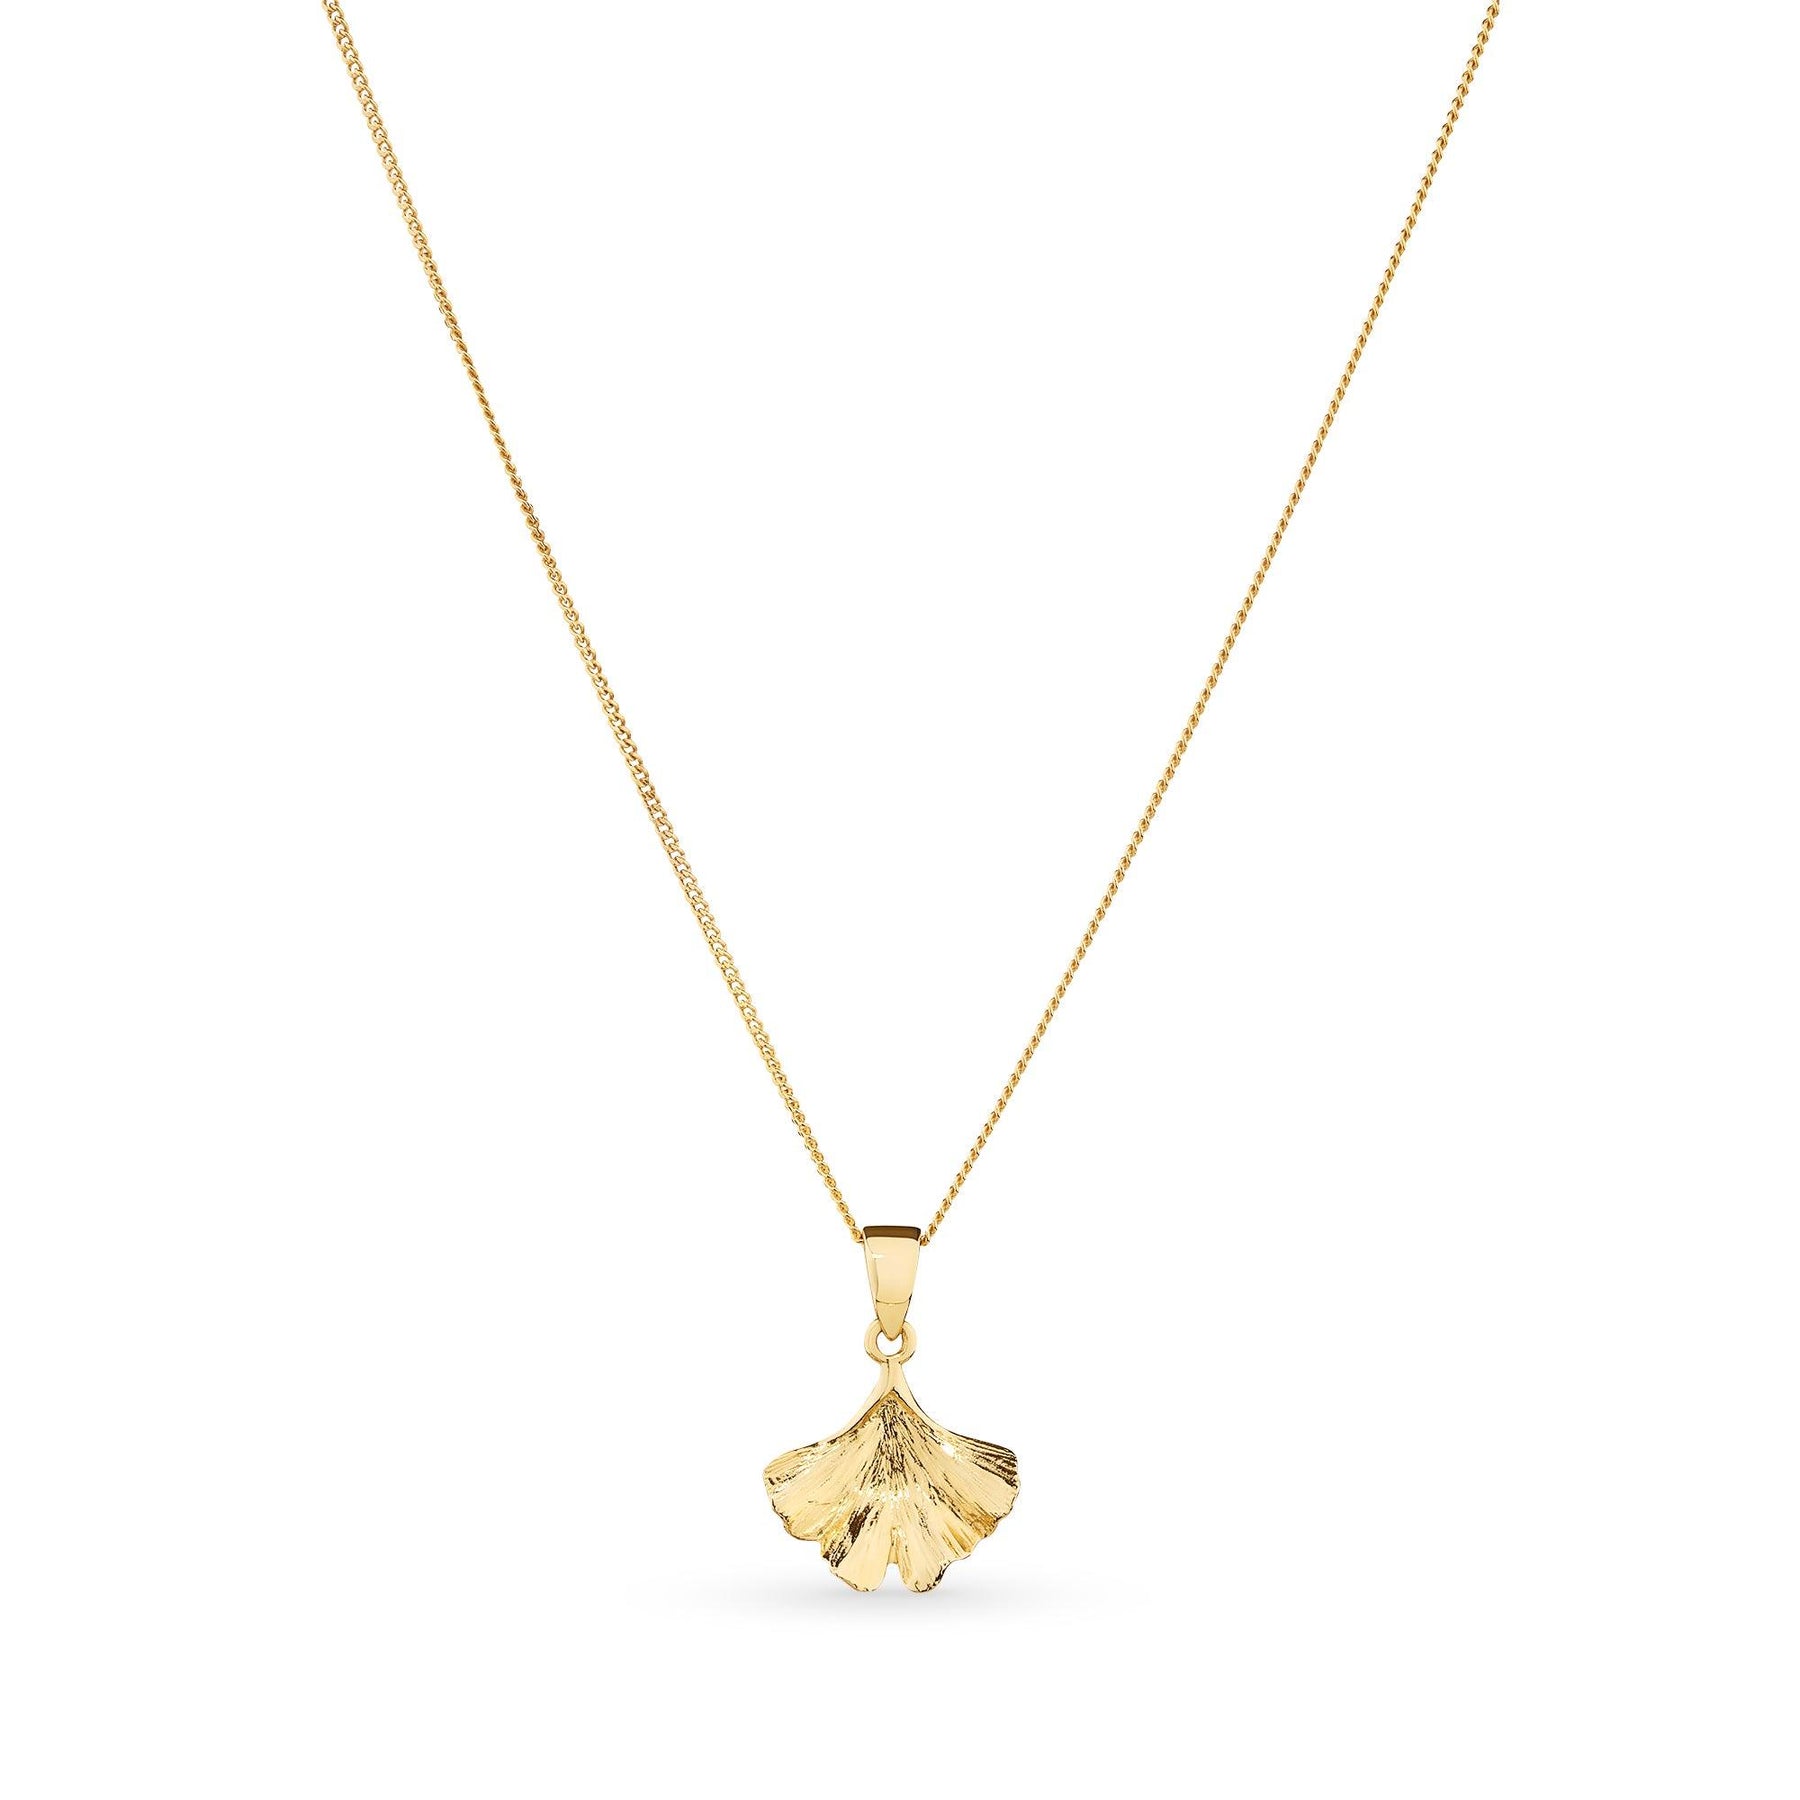 Leaf Pendant in 9ct Yellow Gold - Wallace Bishop